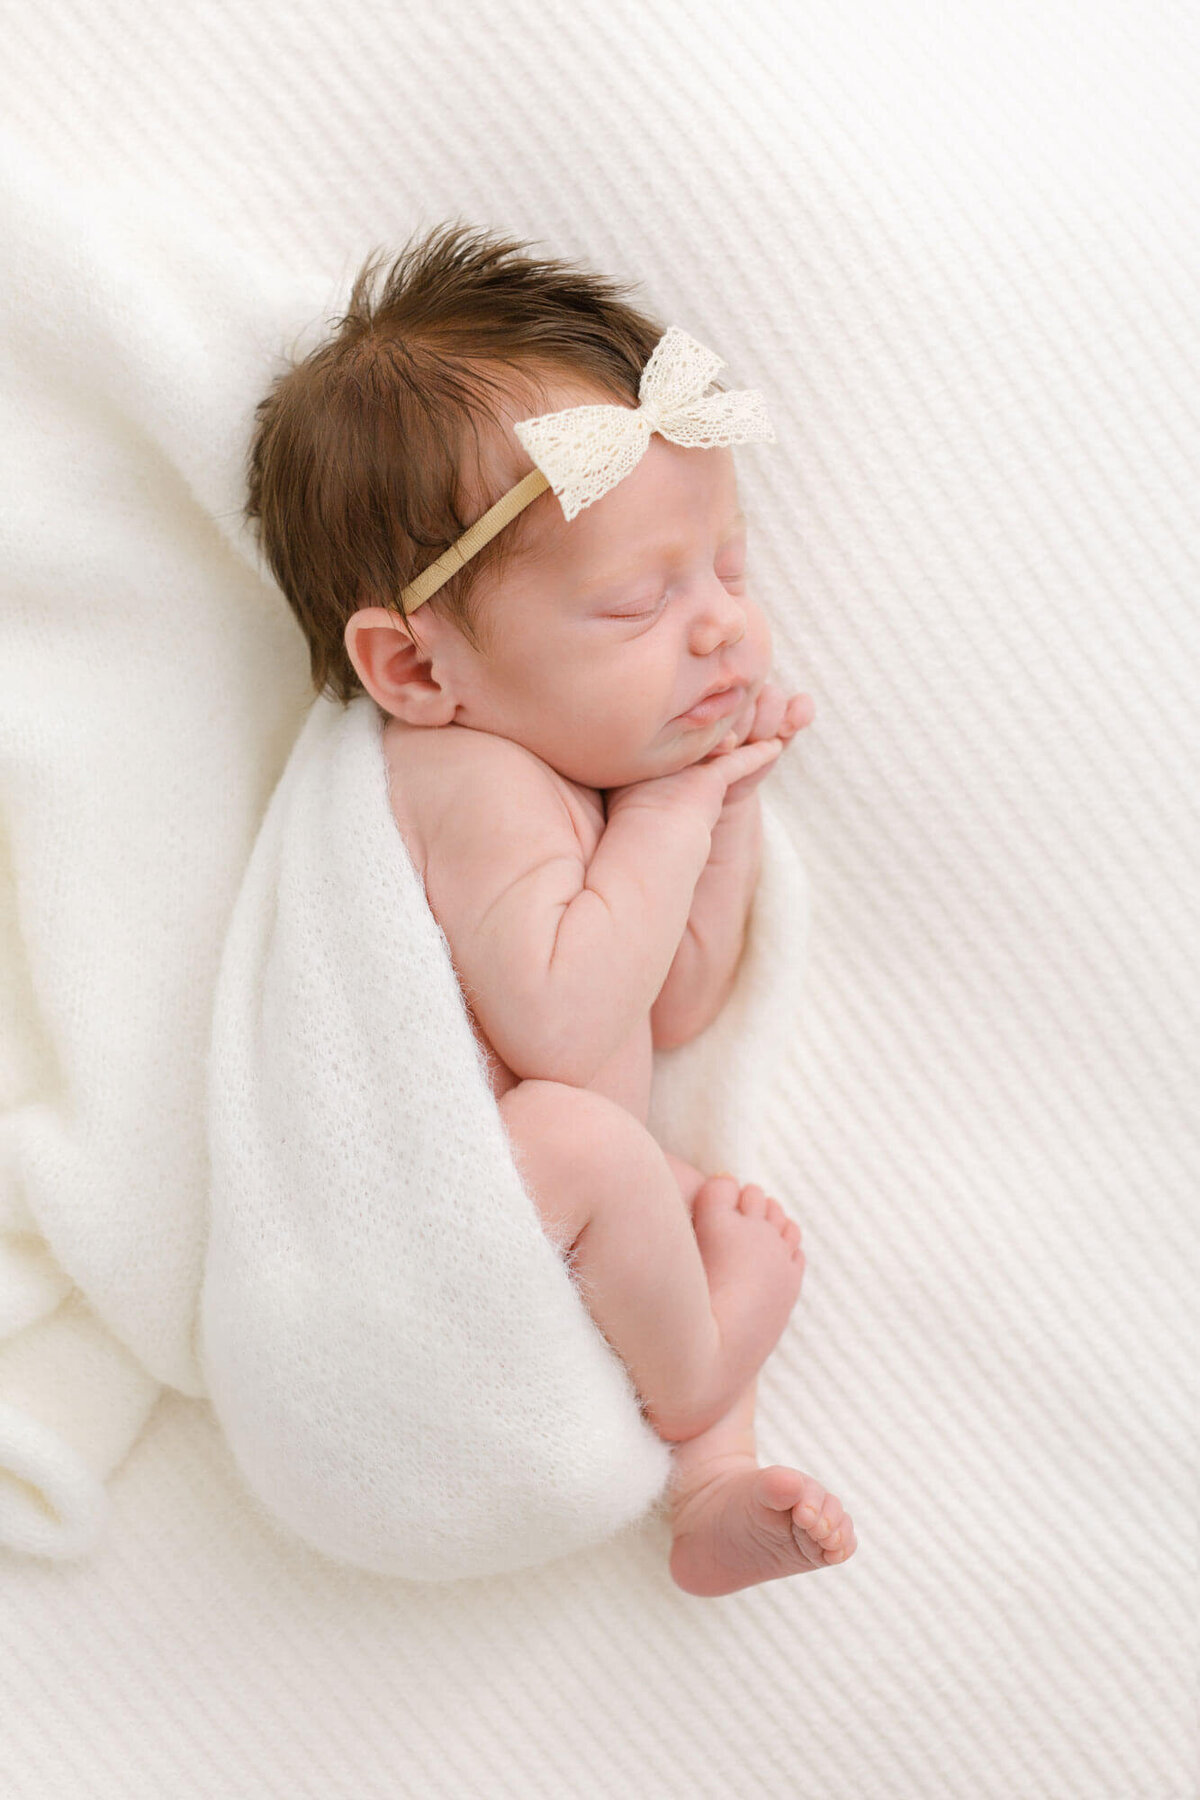 Newborn baby laying on side with a cozy soft white blanket wrapped around the back of her body. Her hands are up by her face and her feet are hanging out a bit and she has a little white bow on her head.